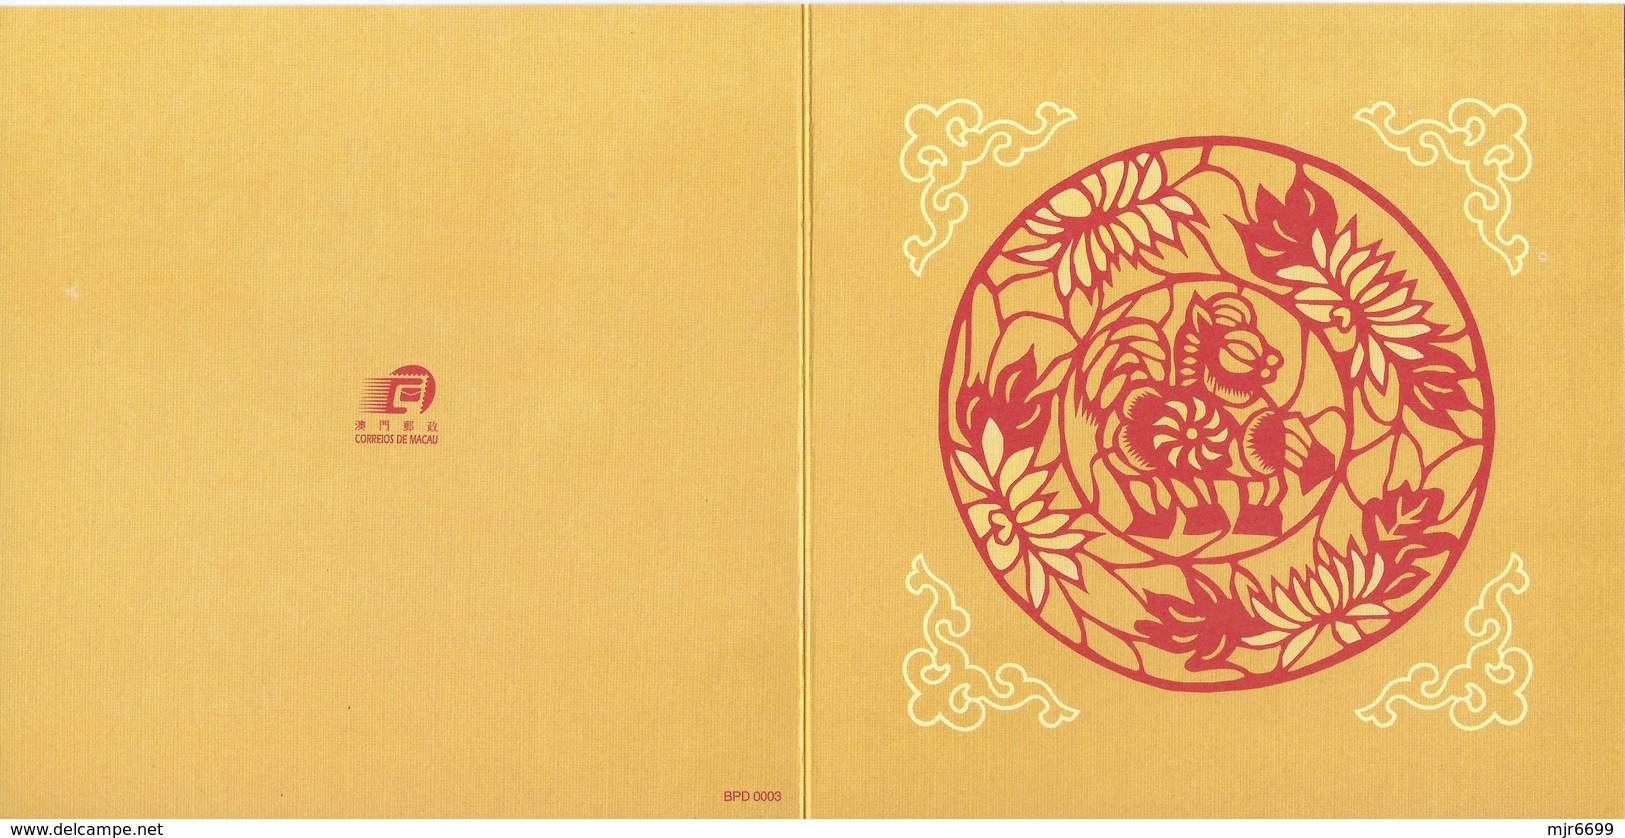 MACAU 2002 LUNAR NEW YEAR OF THE HORSE GREETING CARD & POSTAGE PAID COVER, LOCAL USAGE,  POST OFFICE CODE #BPD003 - Entiers Postaux